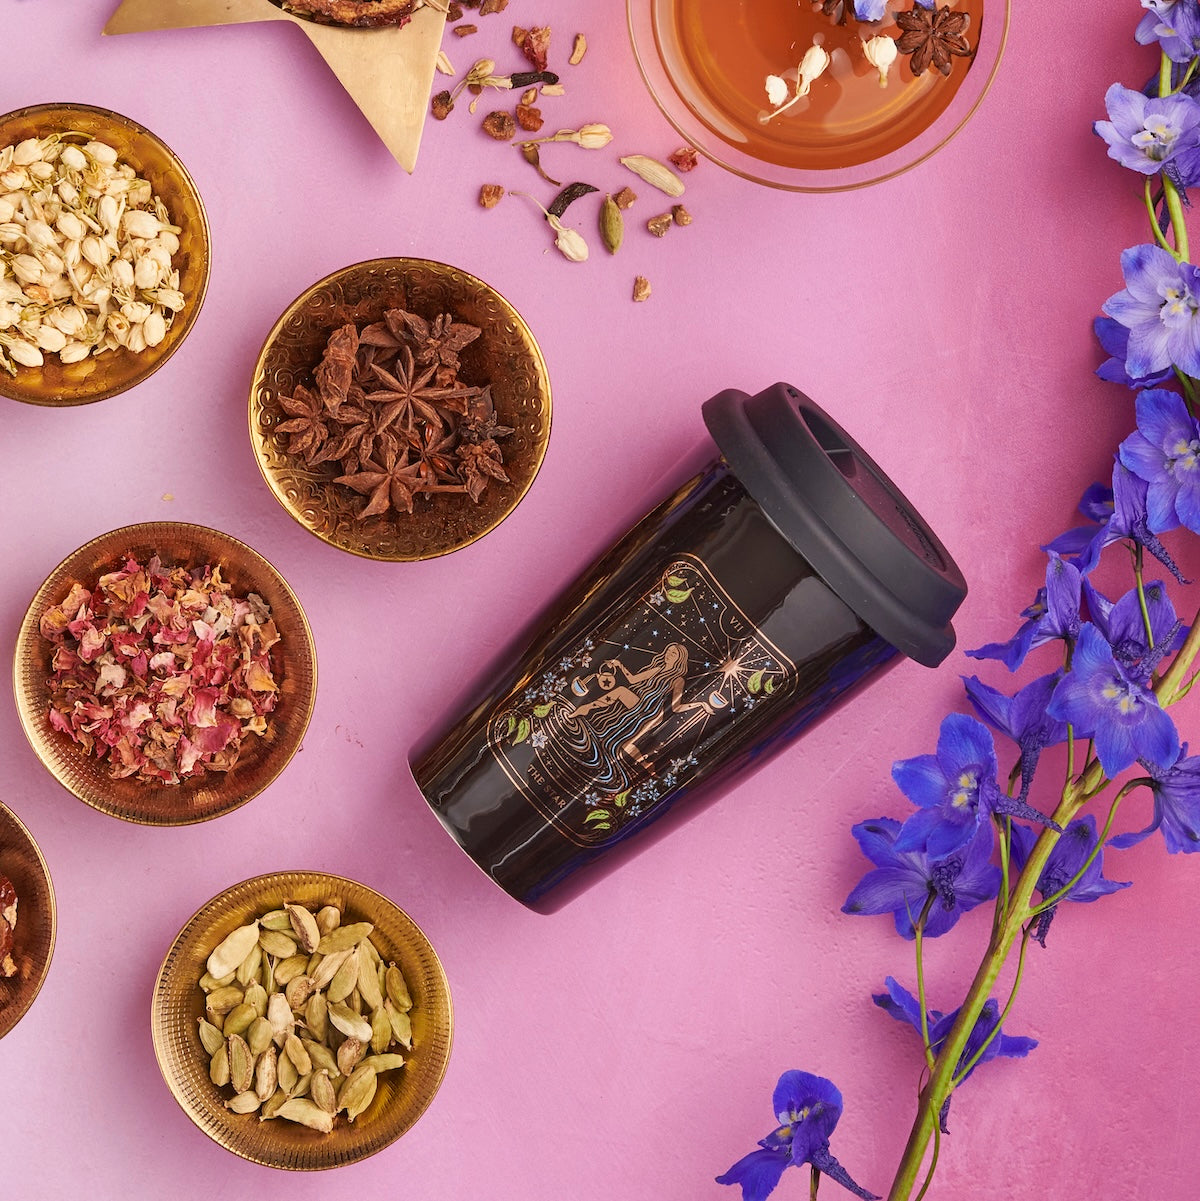 A travel mug with a celestial design is on a pink surface surrounded by bowls containing various dried spices, including star anise, cardamom, and rose petals. Nearby, there&#39;s a cup of organic tea and a few pastries, while vibrant blue flowers also adorn the scene.